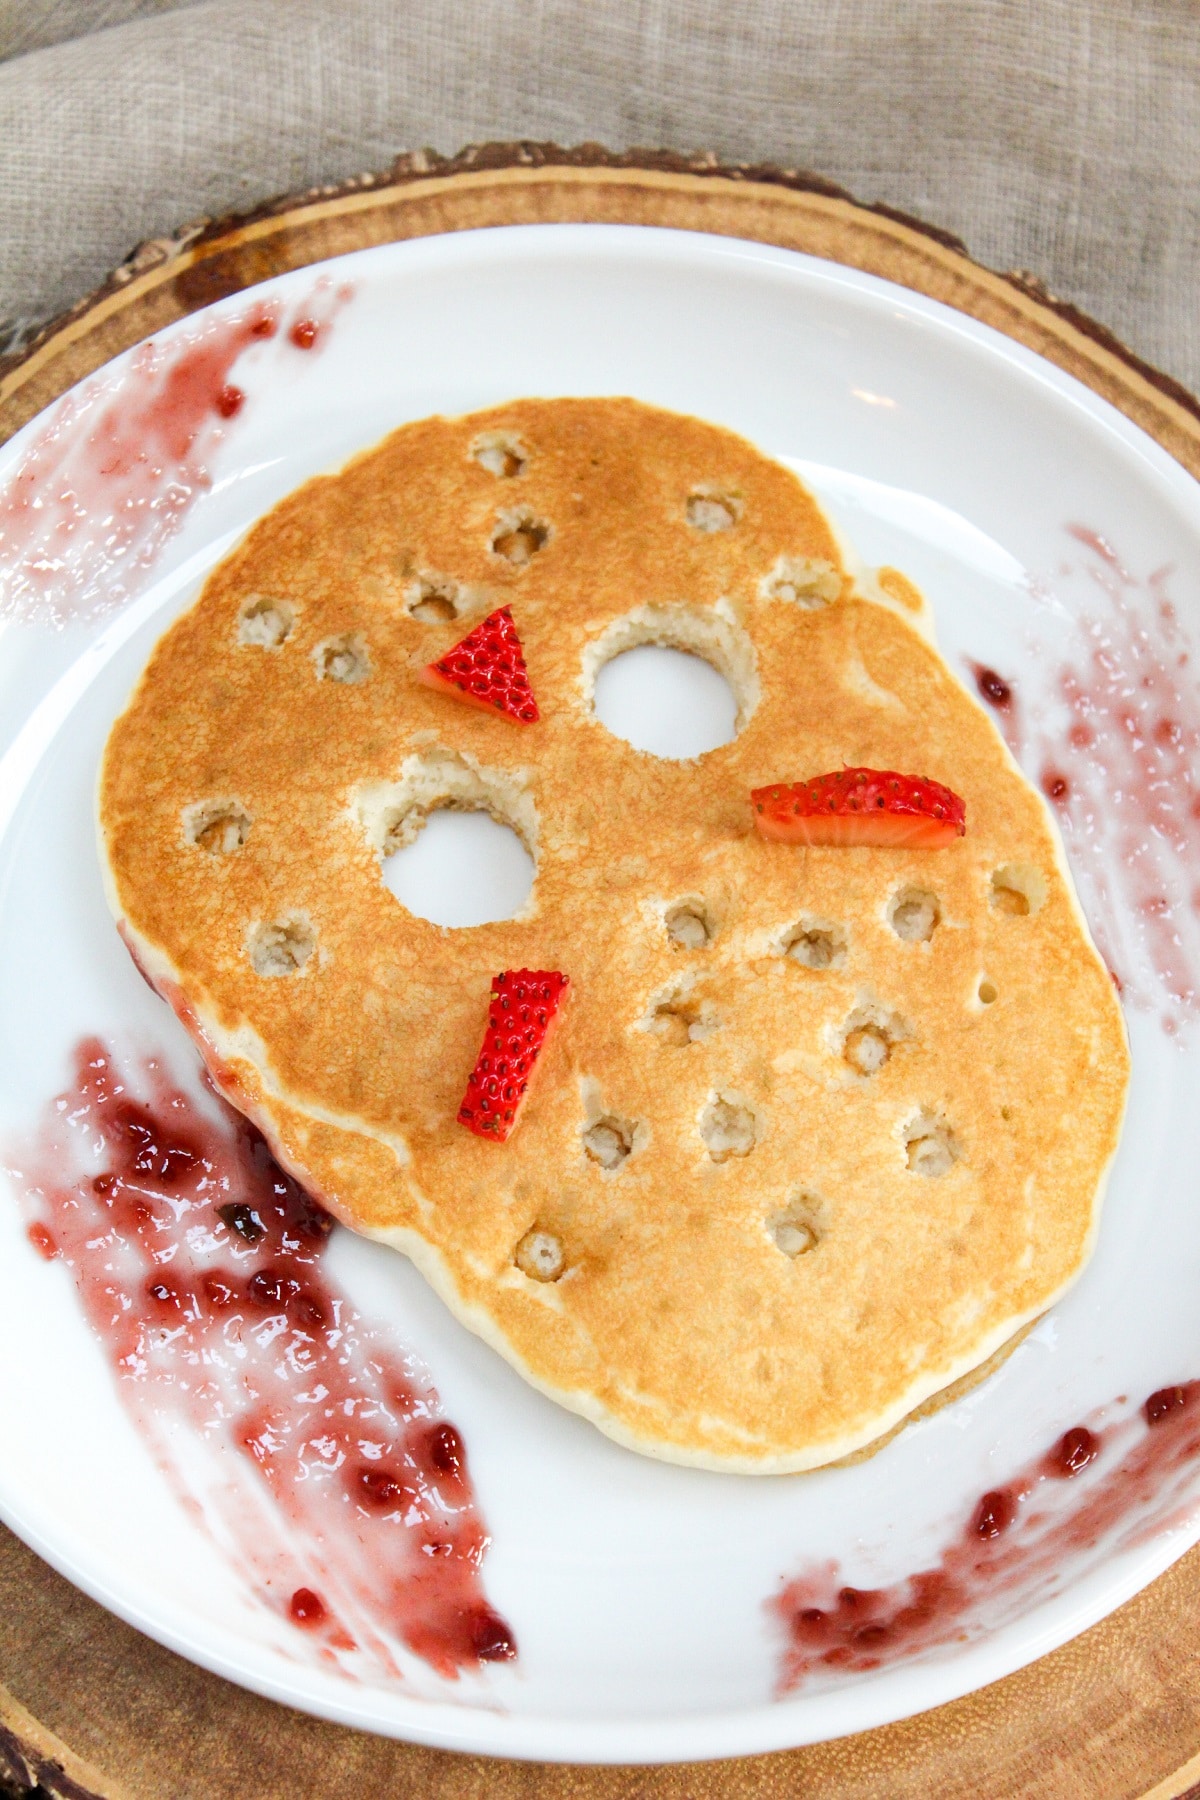 jason vorhees, Friday the 13th, ski mask pancake on a plate with raspberry jam on the plate